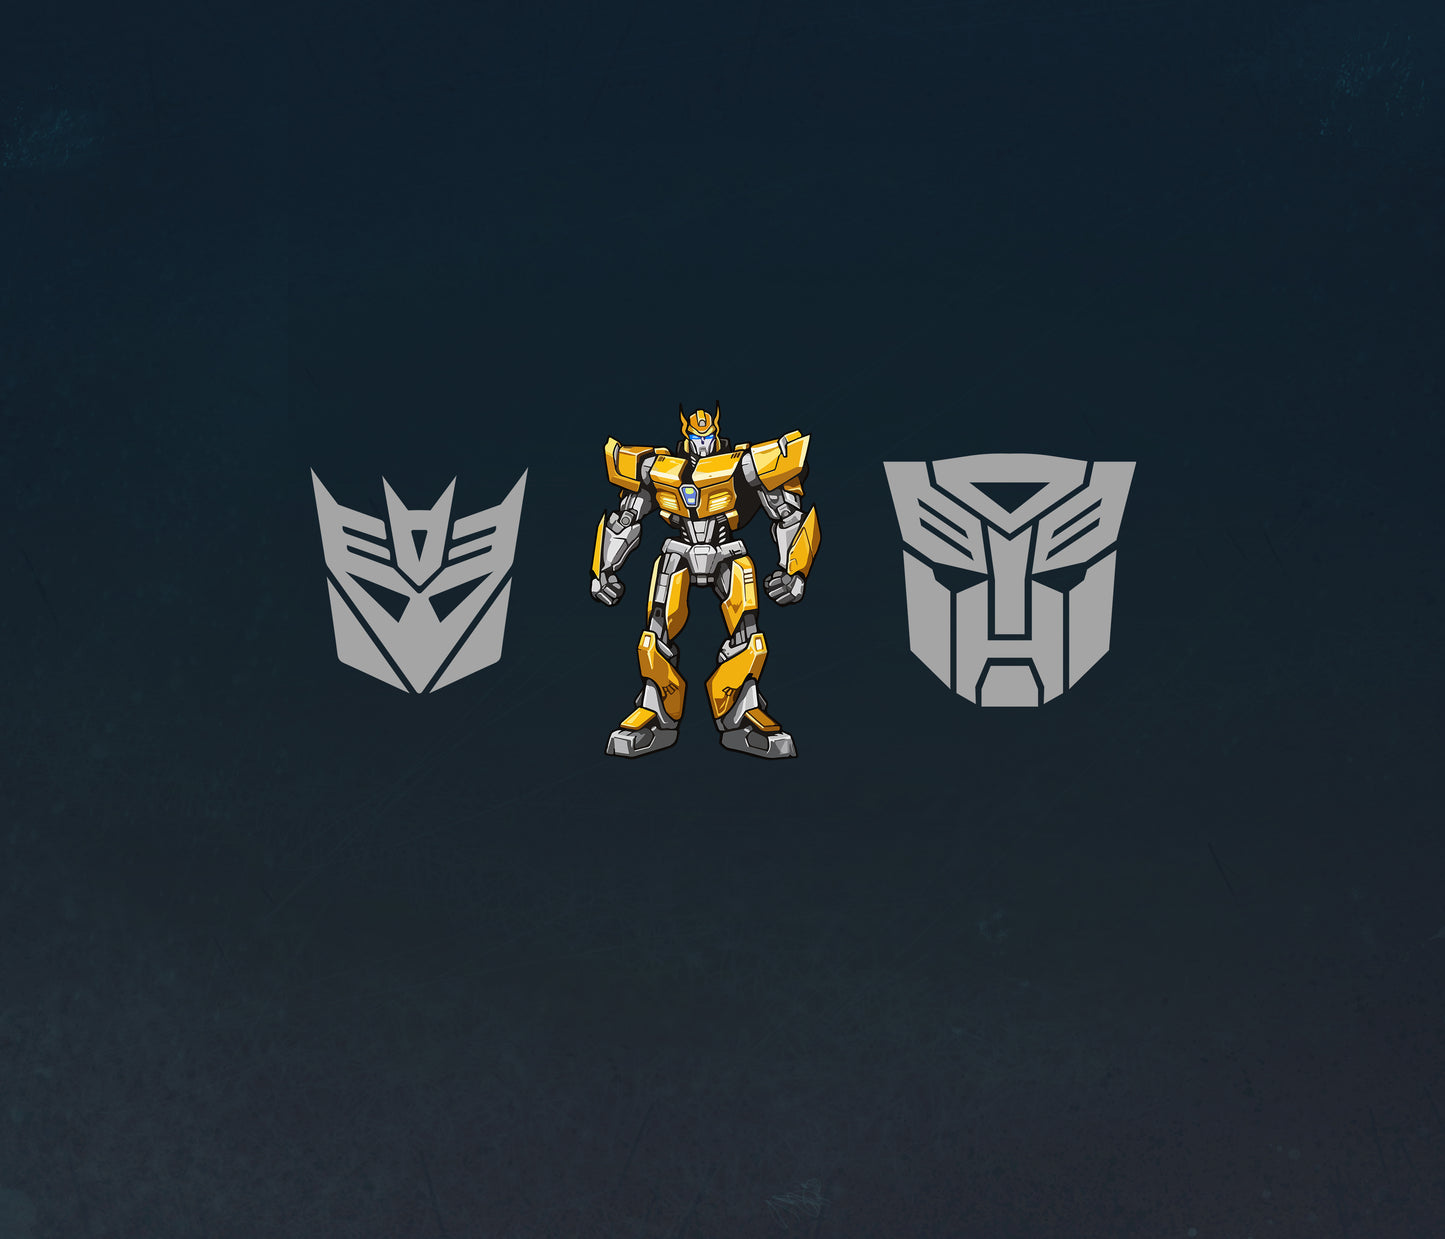 Transformers Free Stickers